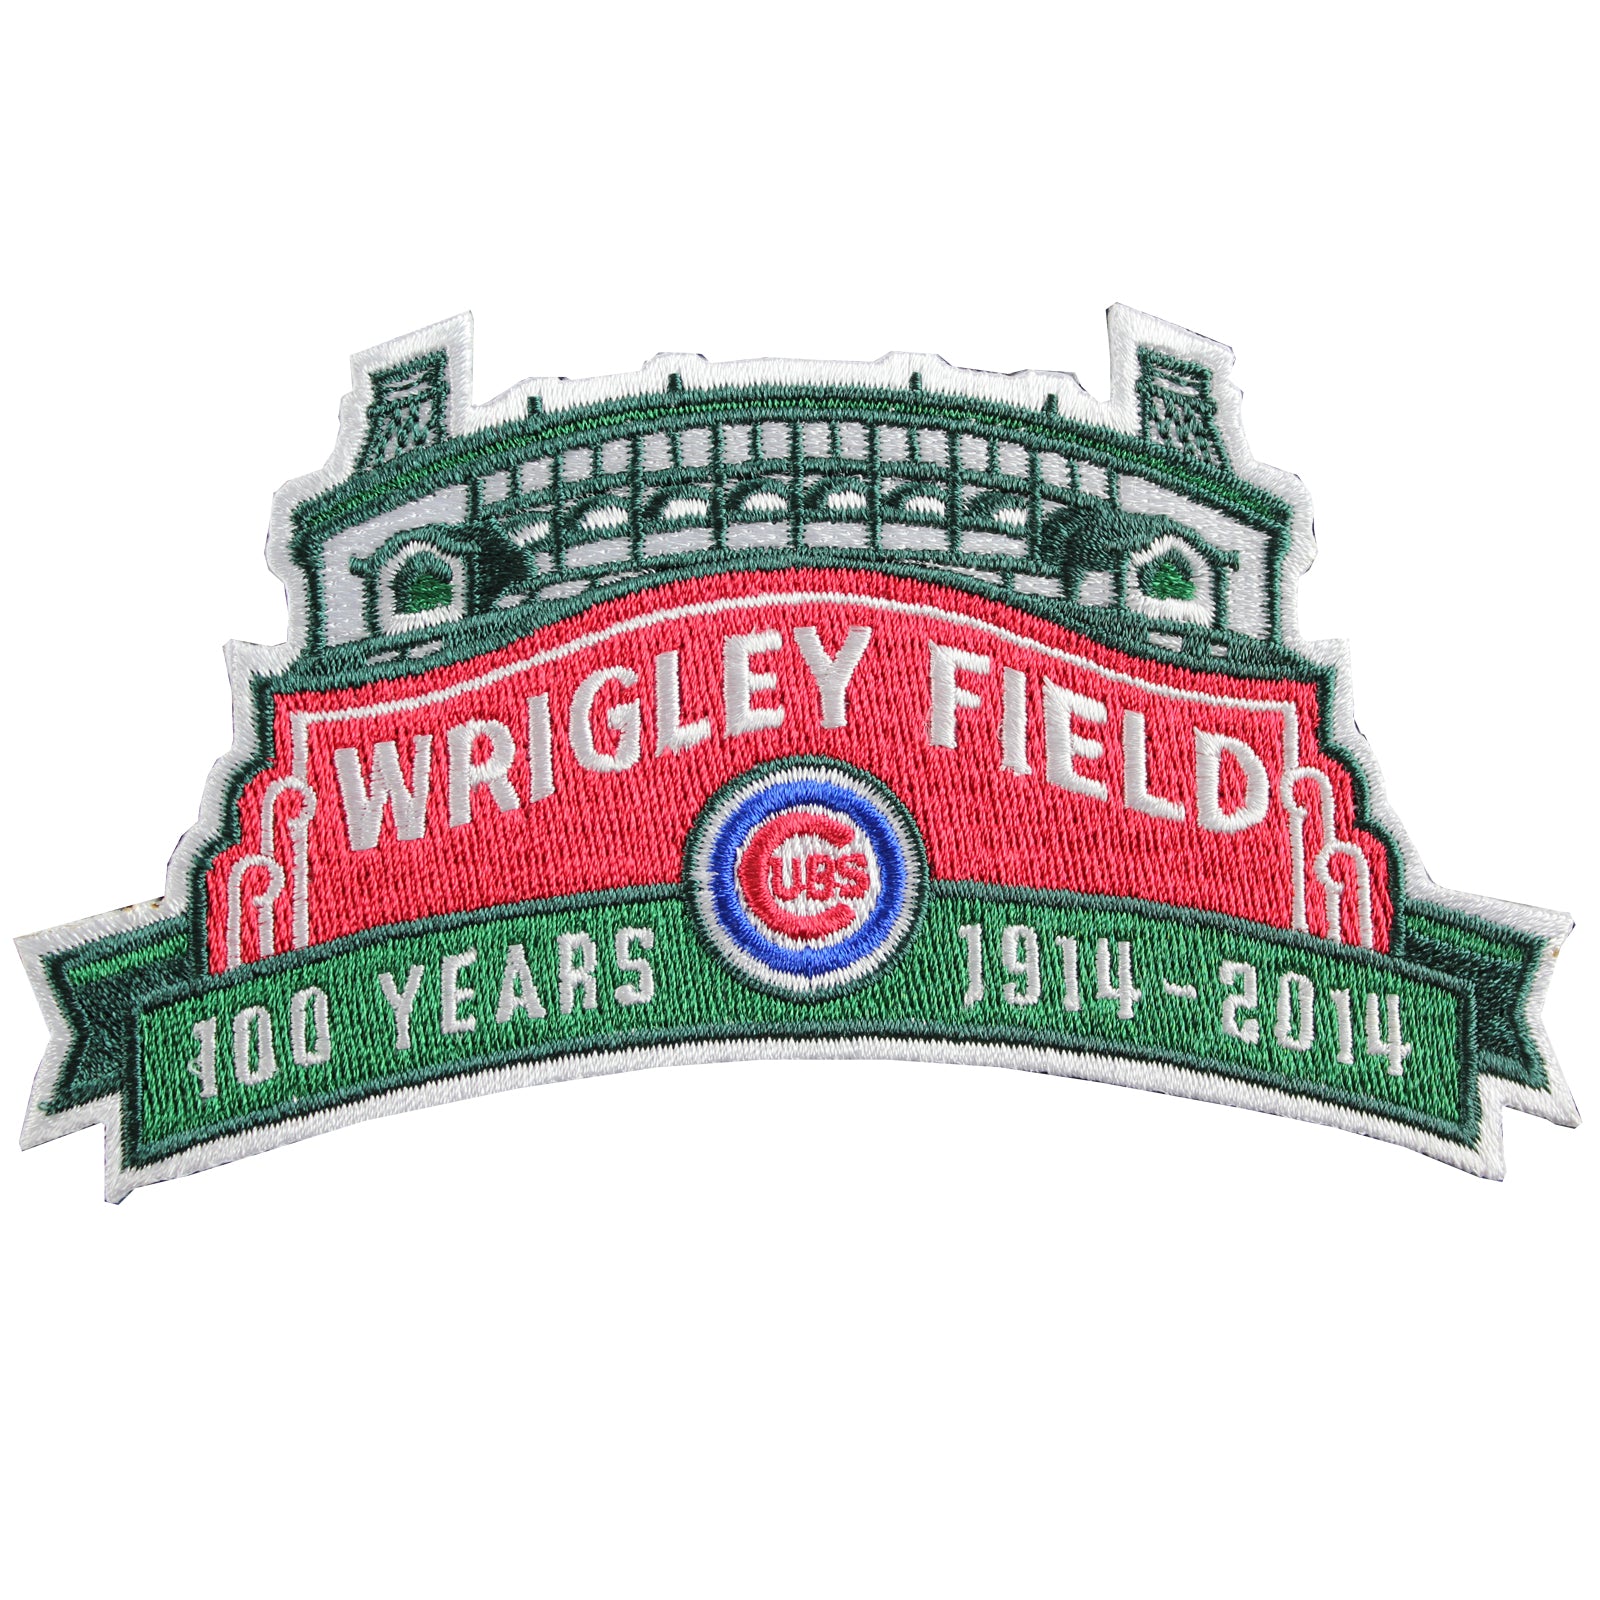 2014 Chicago Cubs Wrigley Field's 100th Anniversary MLB Season Jersey Sleeve Patch 